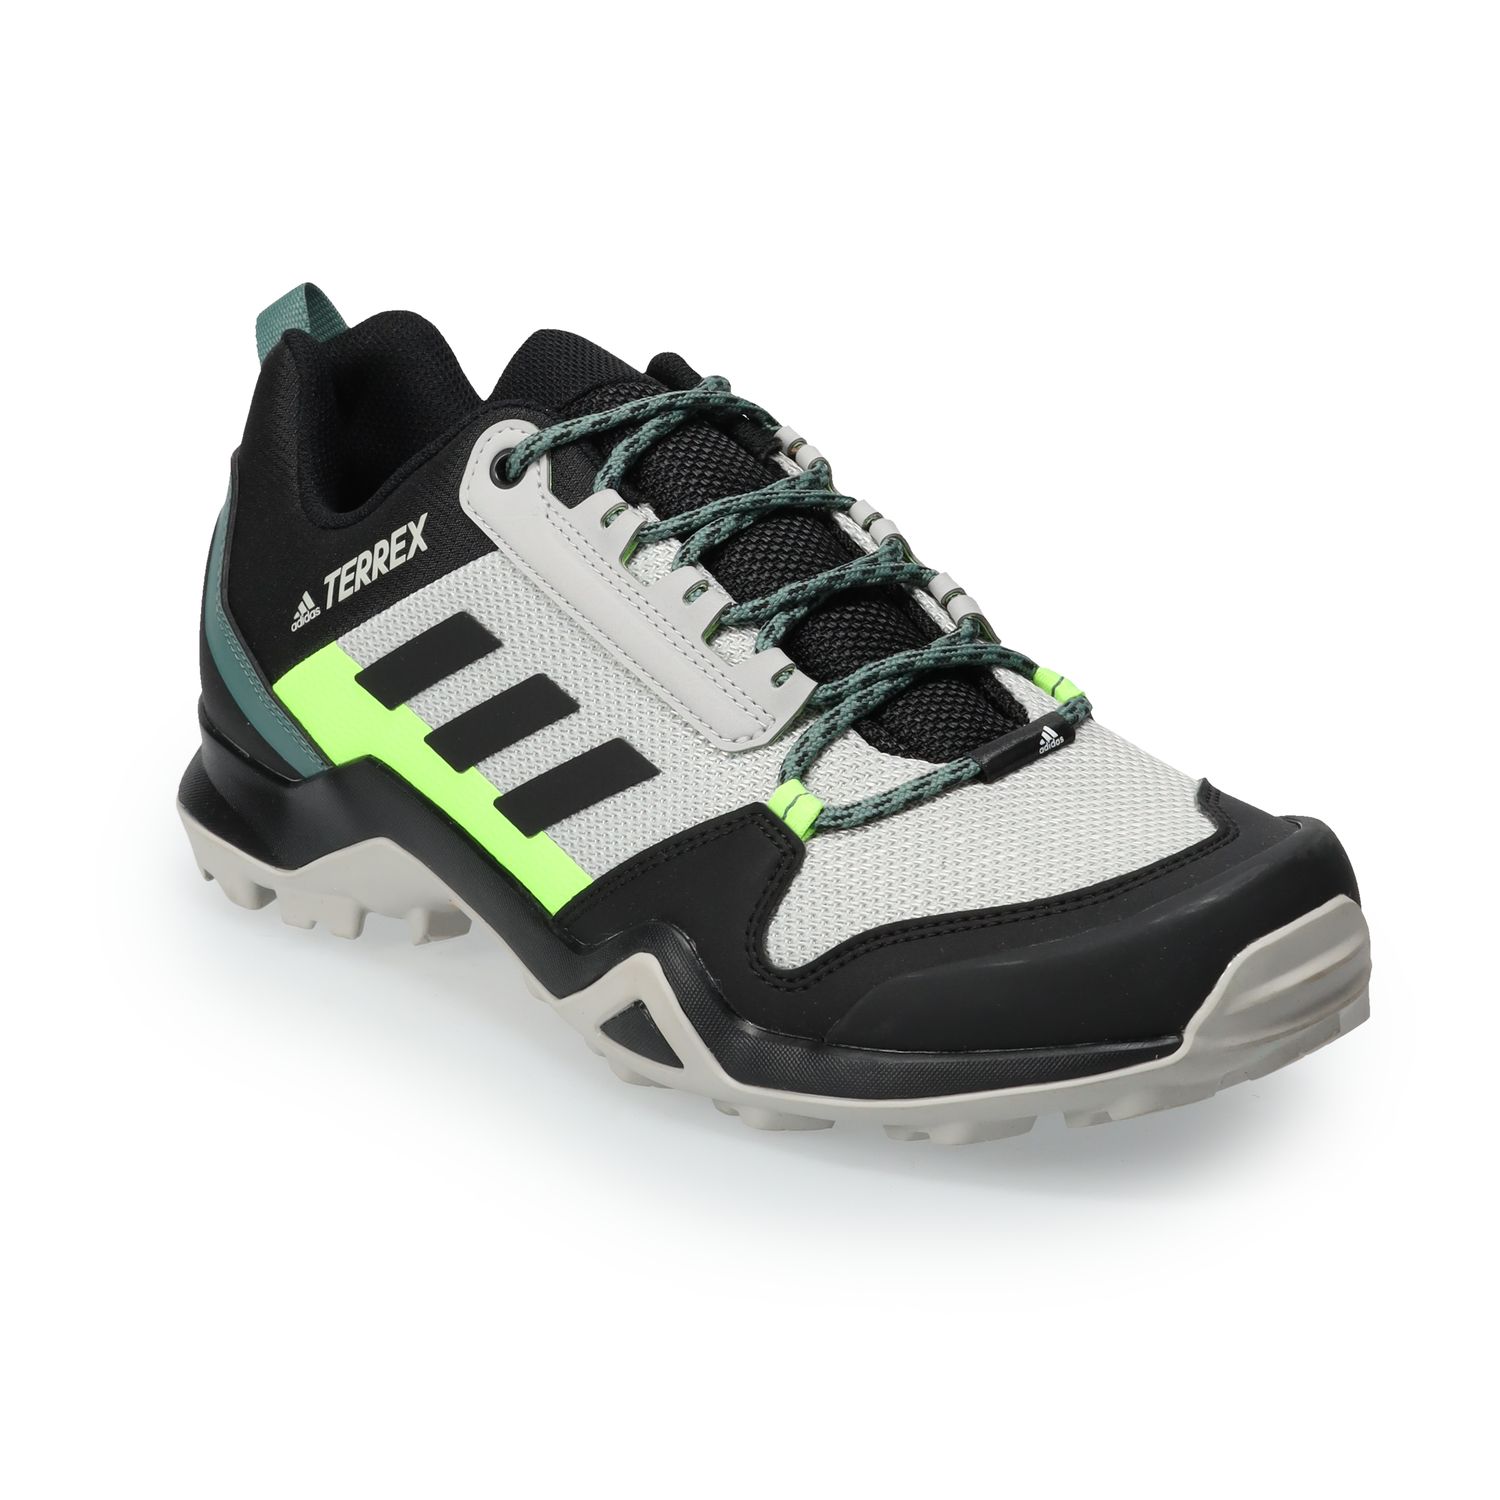 where to buy adidas terrex shoes